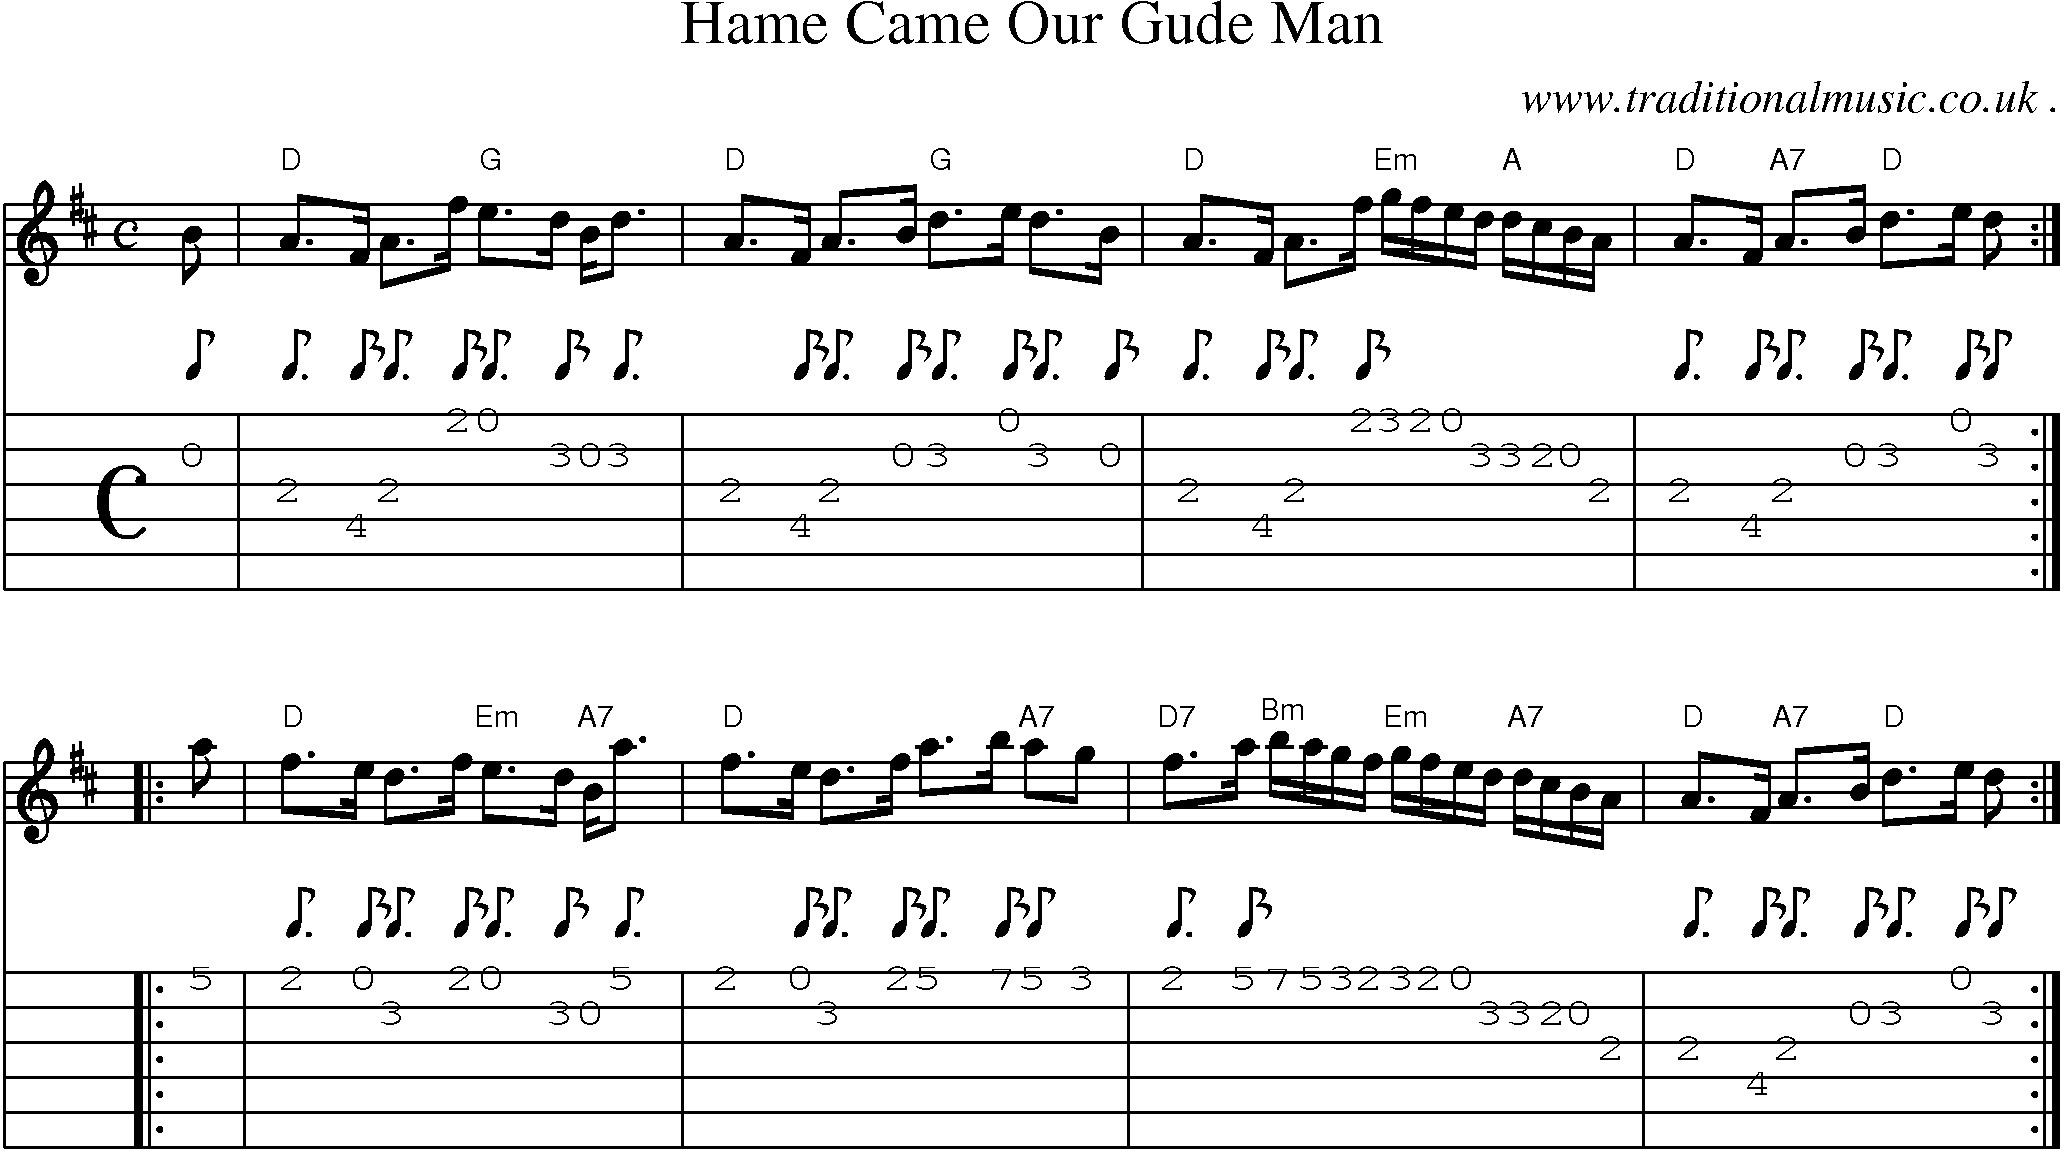 Sheet-music  score, Chords and Guitar Tabs for Hame Came Our Gude Man